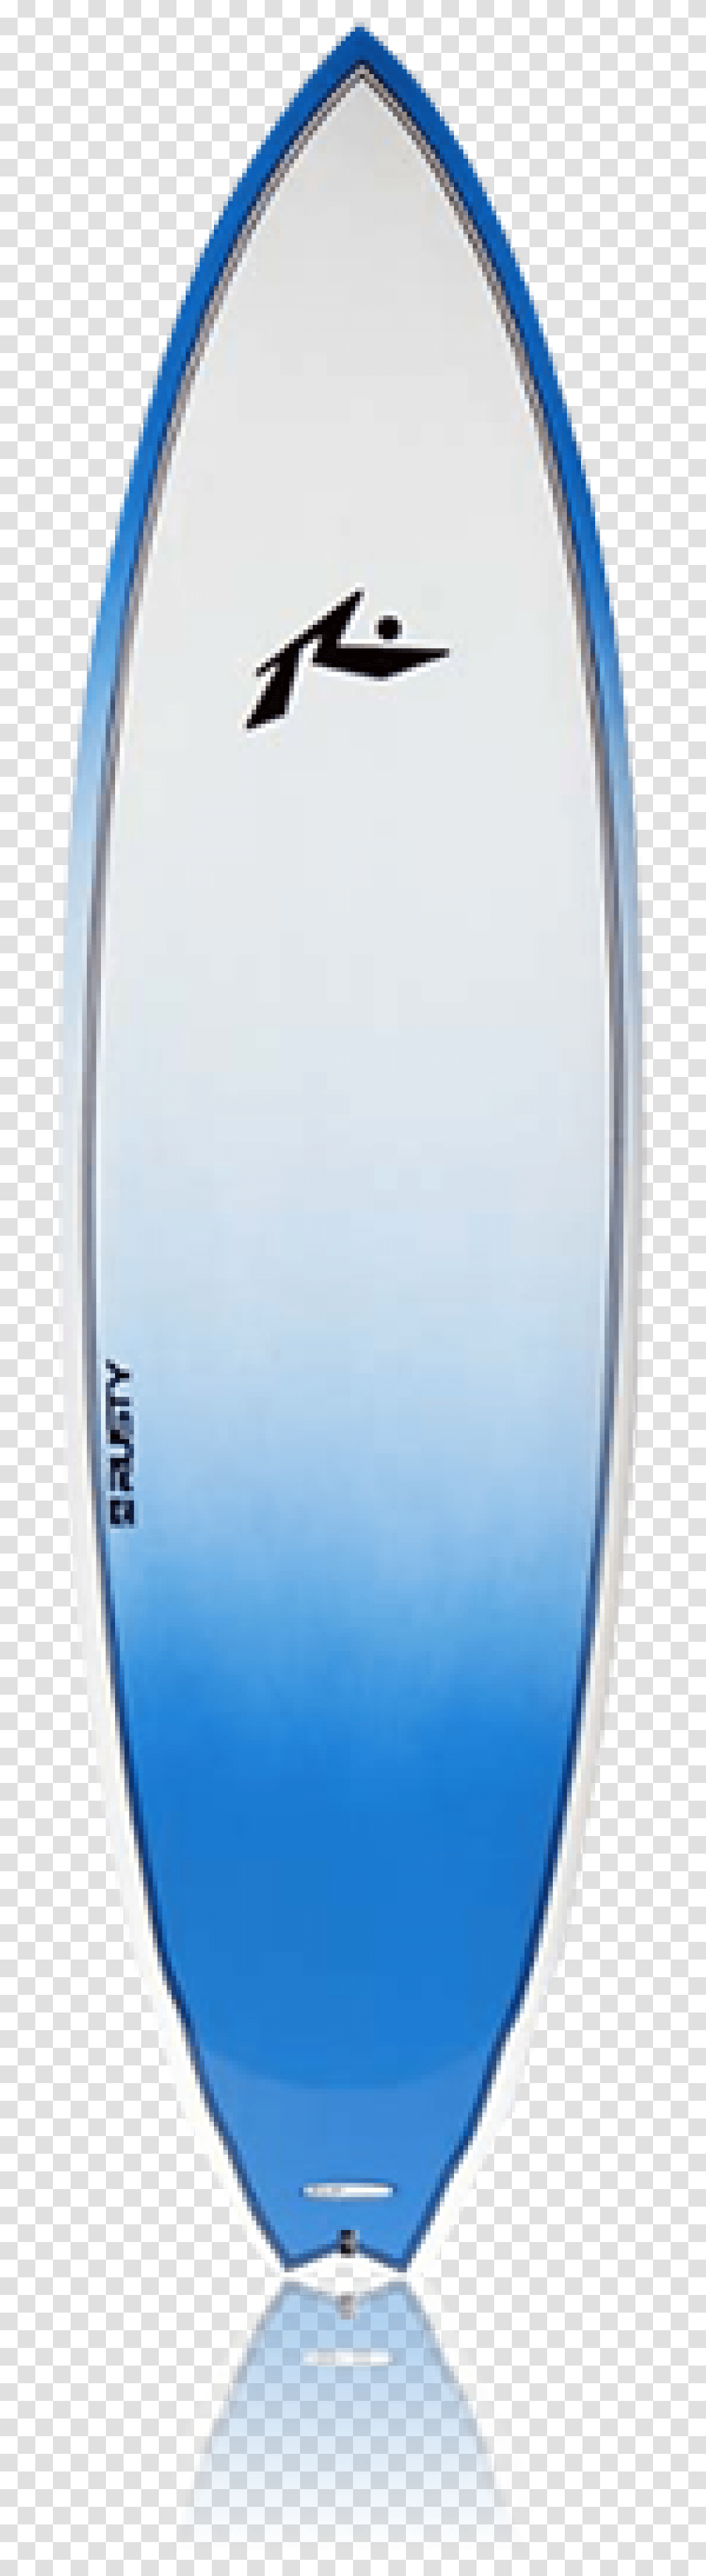 Surfboard, White Board, Appliance, Mirror Transparent Png